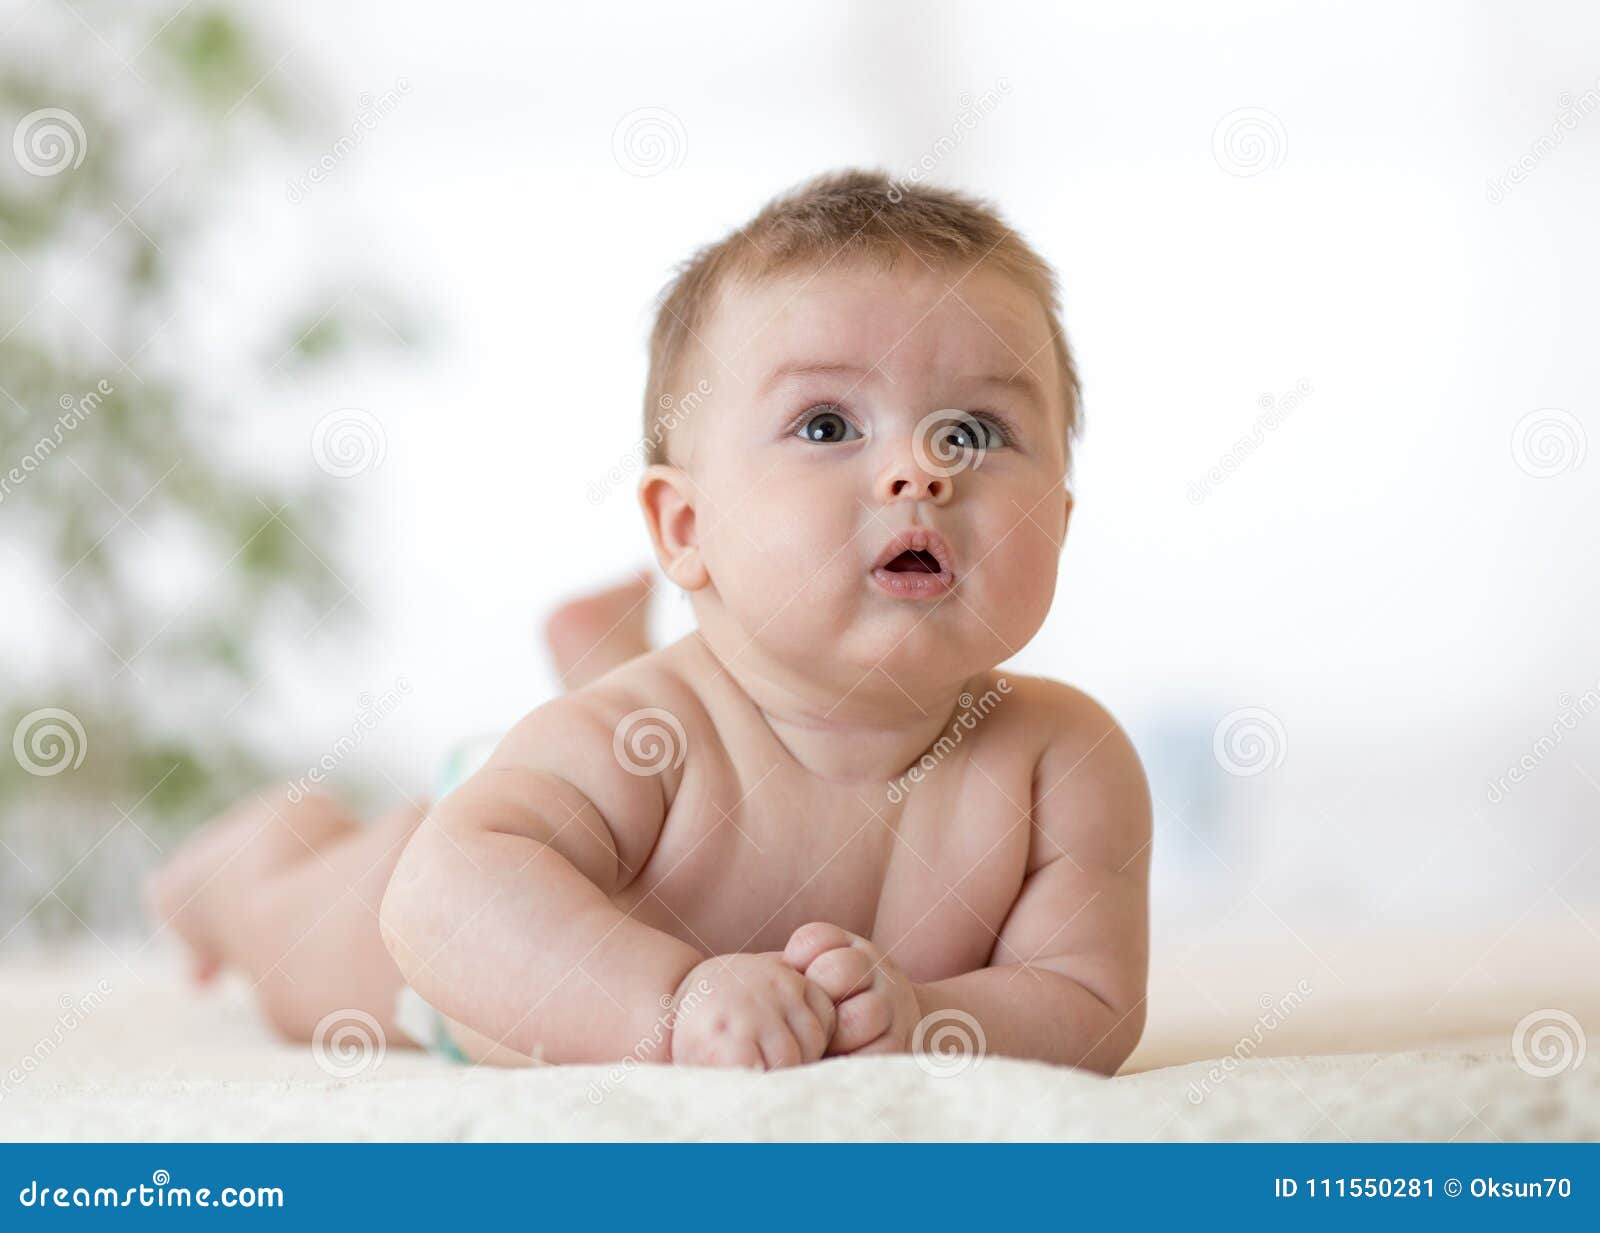 Cute baby boy laying down stock image. Image of interior - 111550281